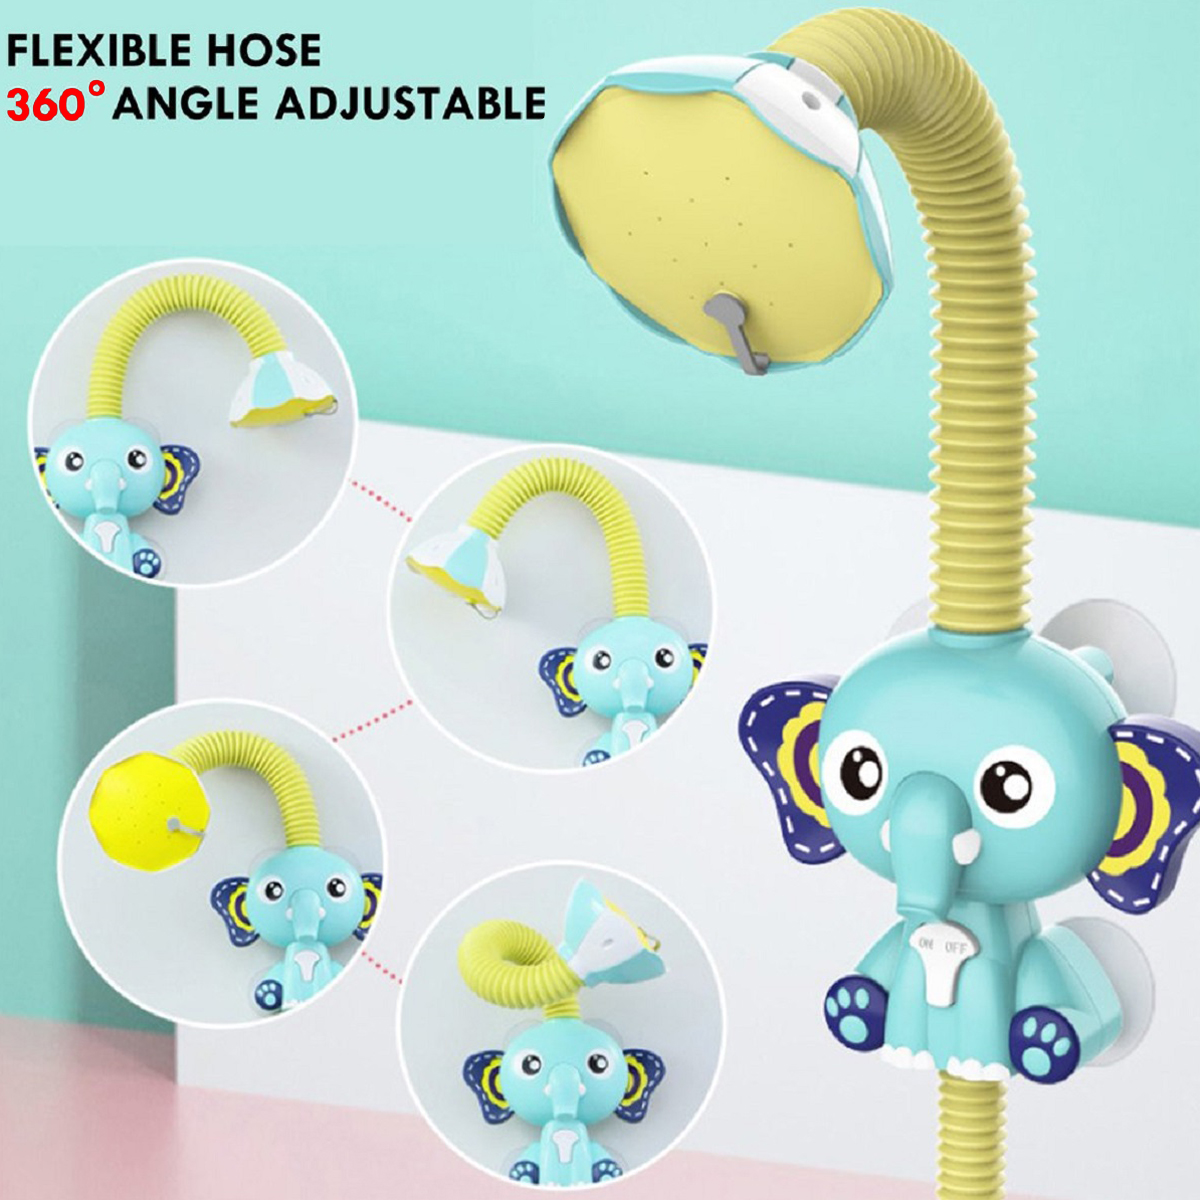 Electric-Elephant-Faucet-Shower-Water-Spray-Baby-Bath-Toy-Two-Water-Outlet-Modes-for-Kids-Swimming-B-1716355-4